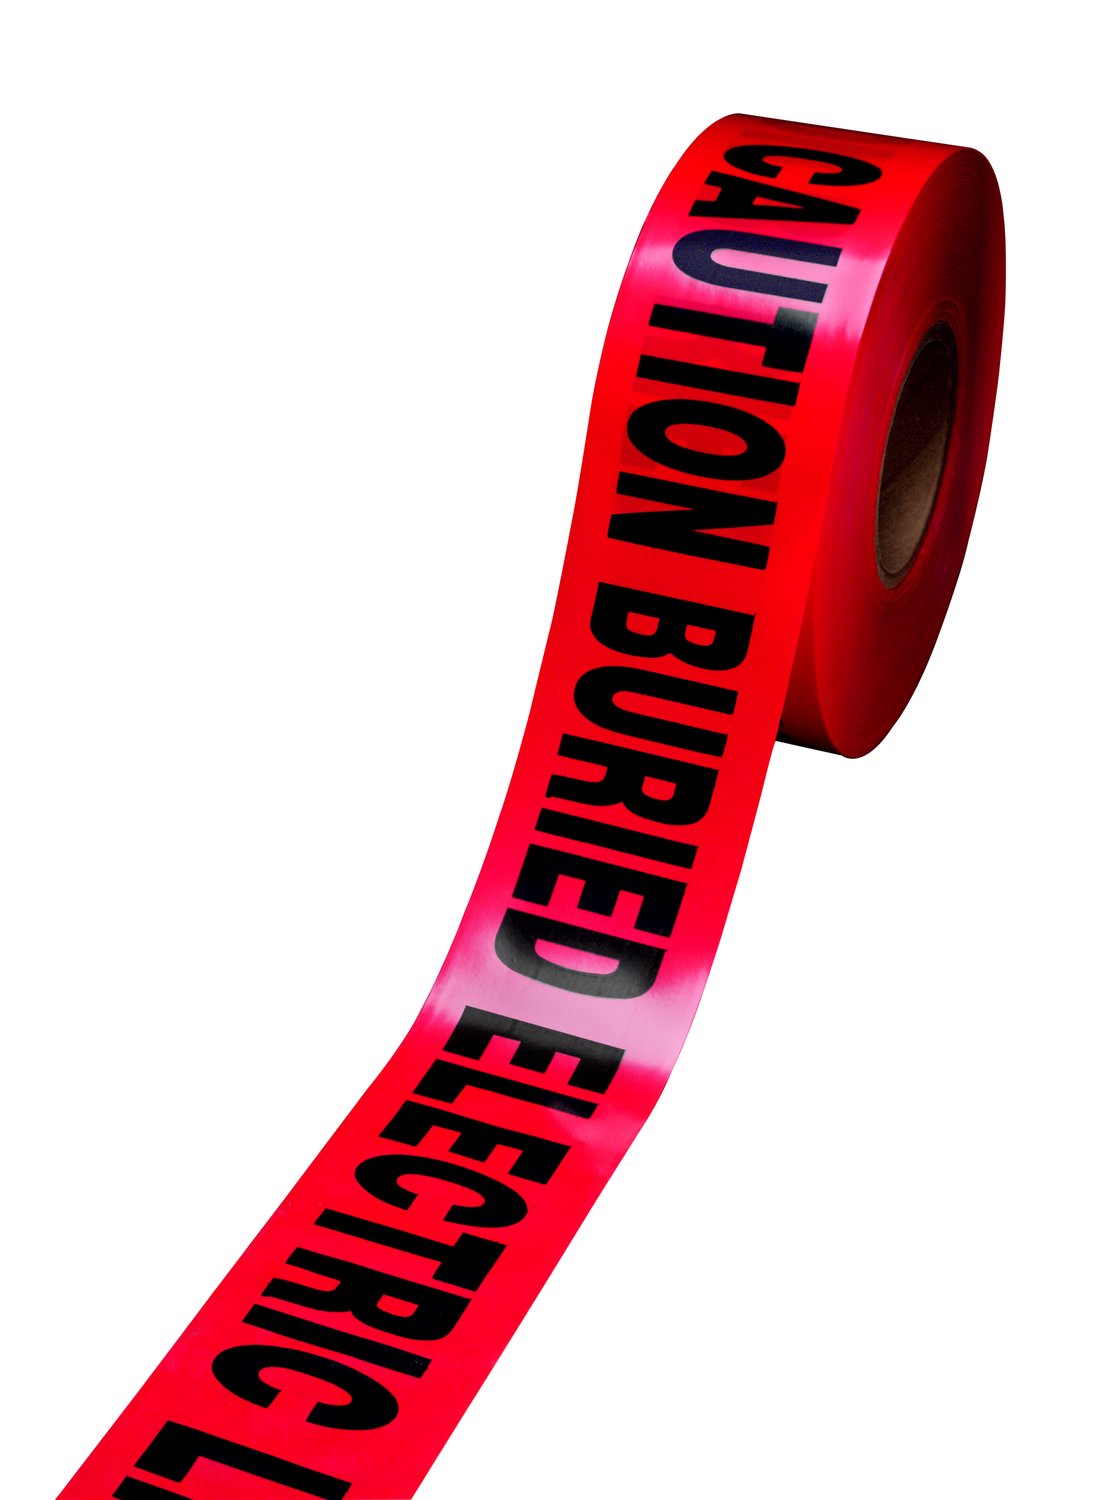 7000132915 - Scotch Buried Barricade Tape 303, CAUTION BURIED ELECTRIC LINE BELOW, 3
in x 300 ft, Red, 16 rolls/Case